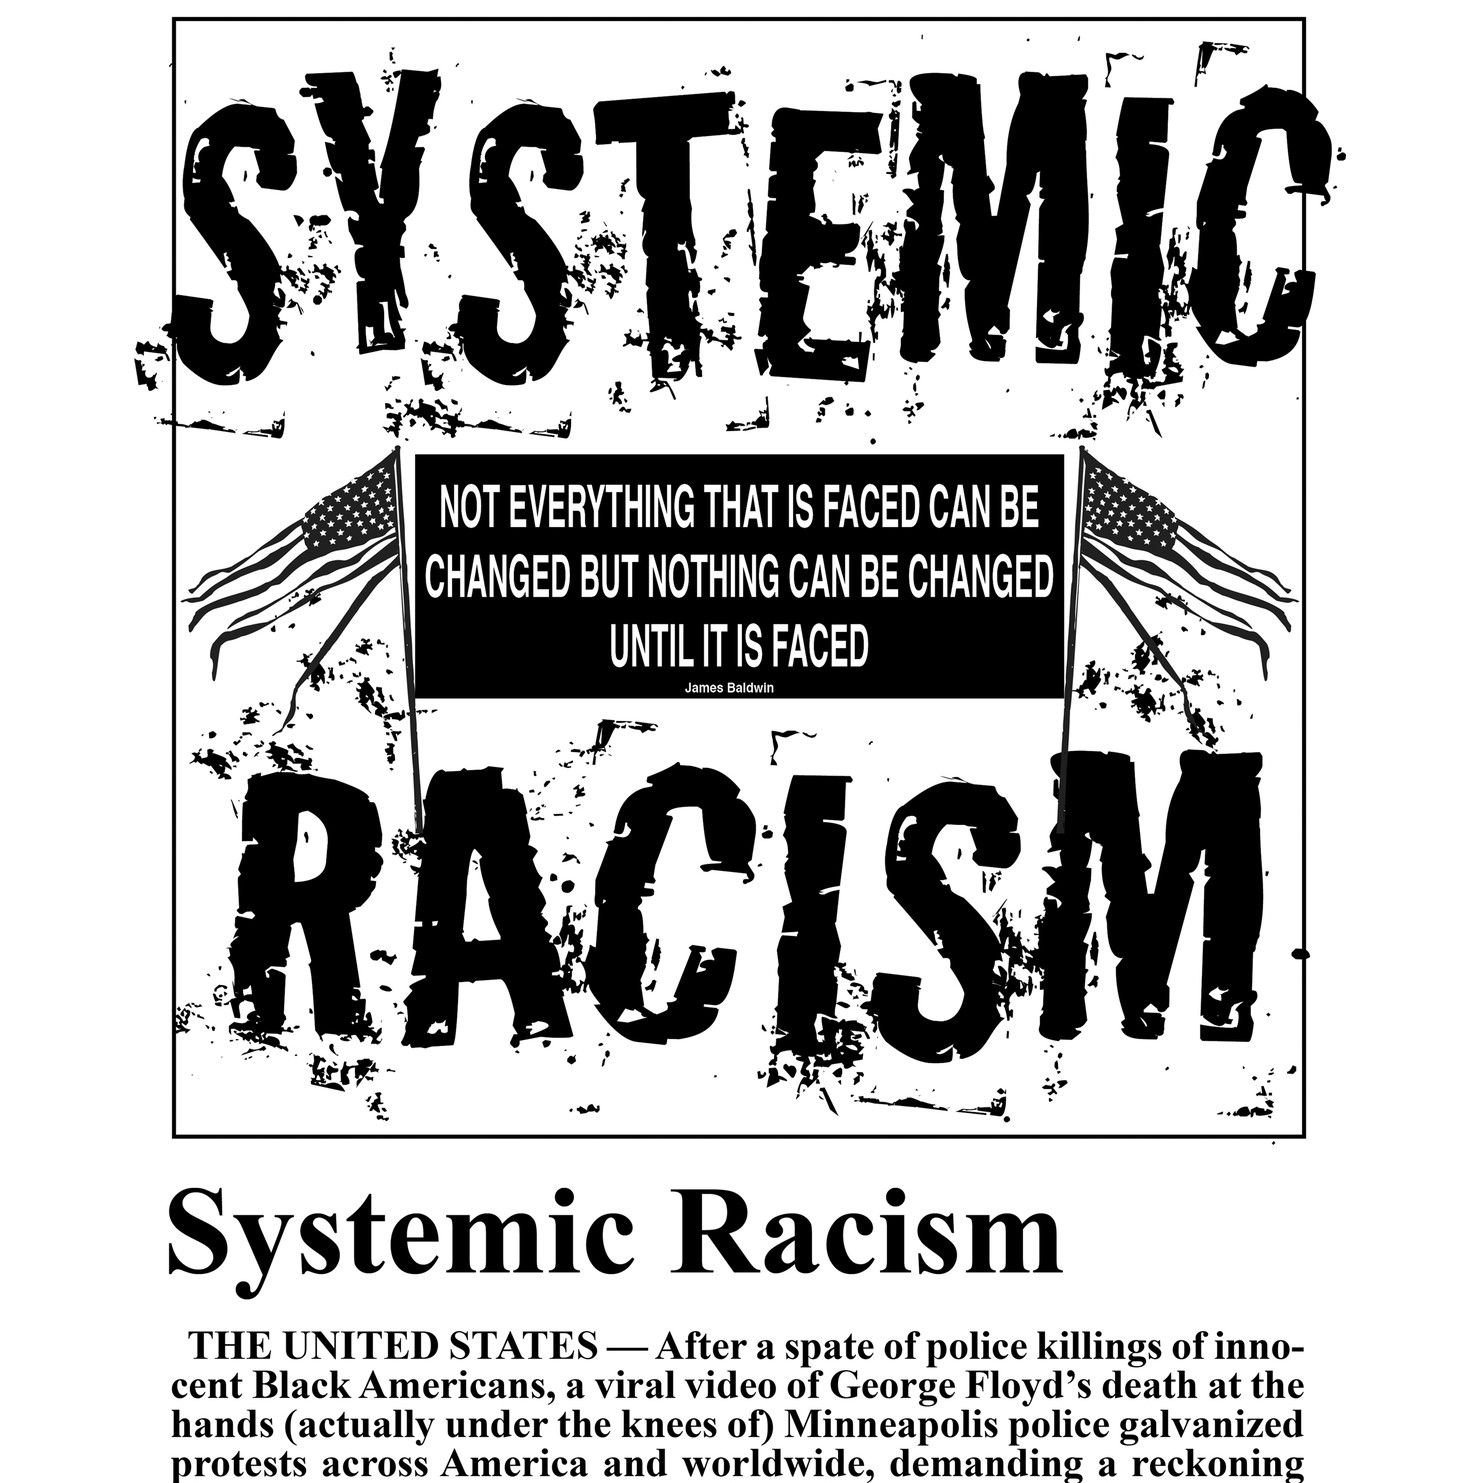 a print with the words "Systemic Racism" in huge text with two American flags ripped apart in the middle with a quote in between them and a paragraph is found on the bottom of the piece.